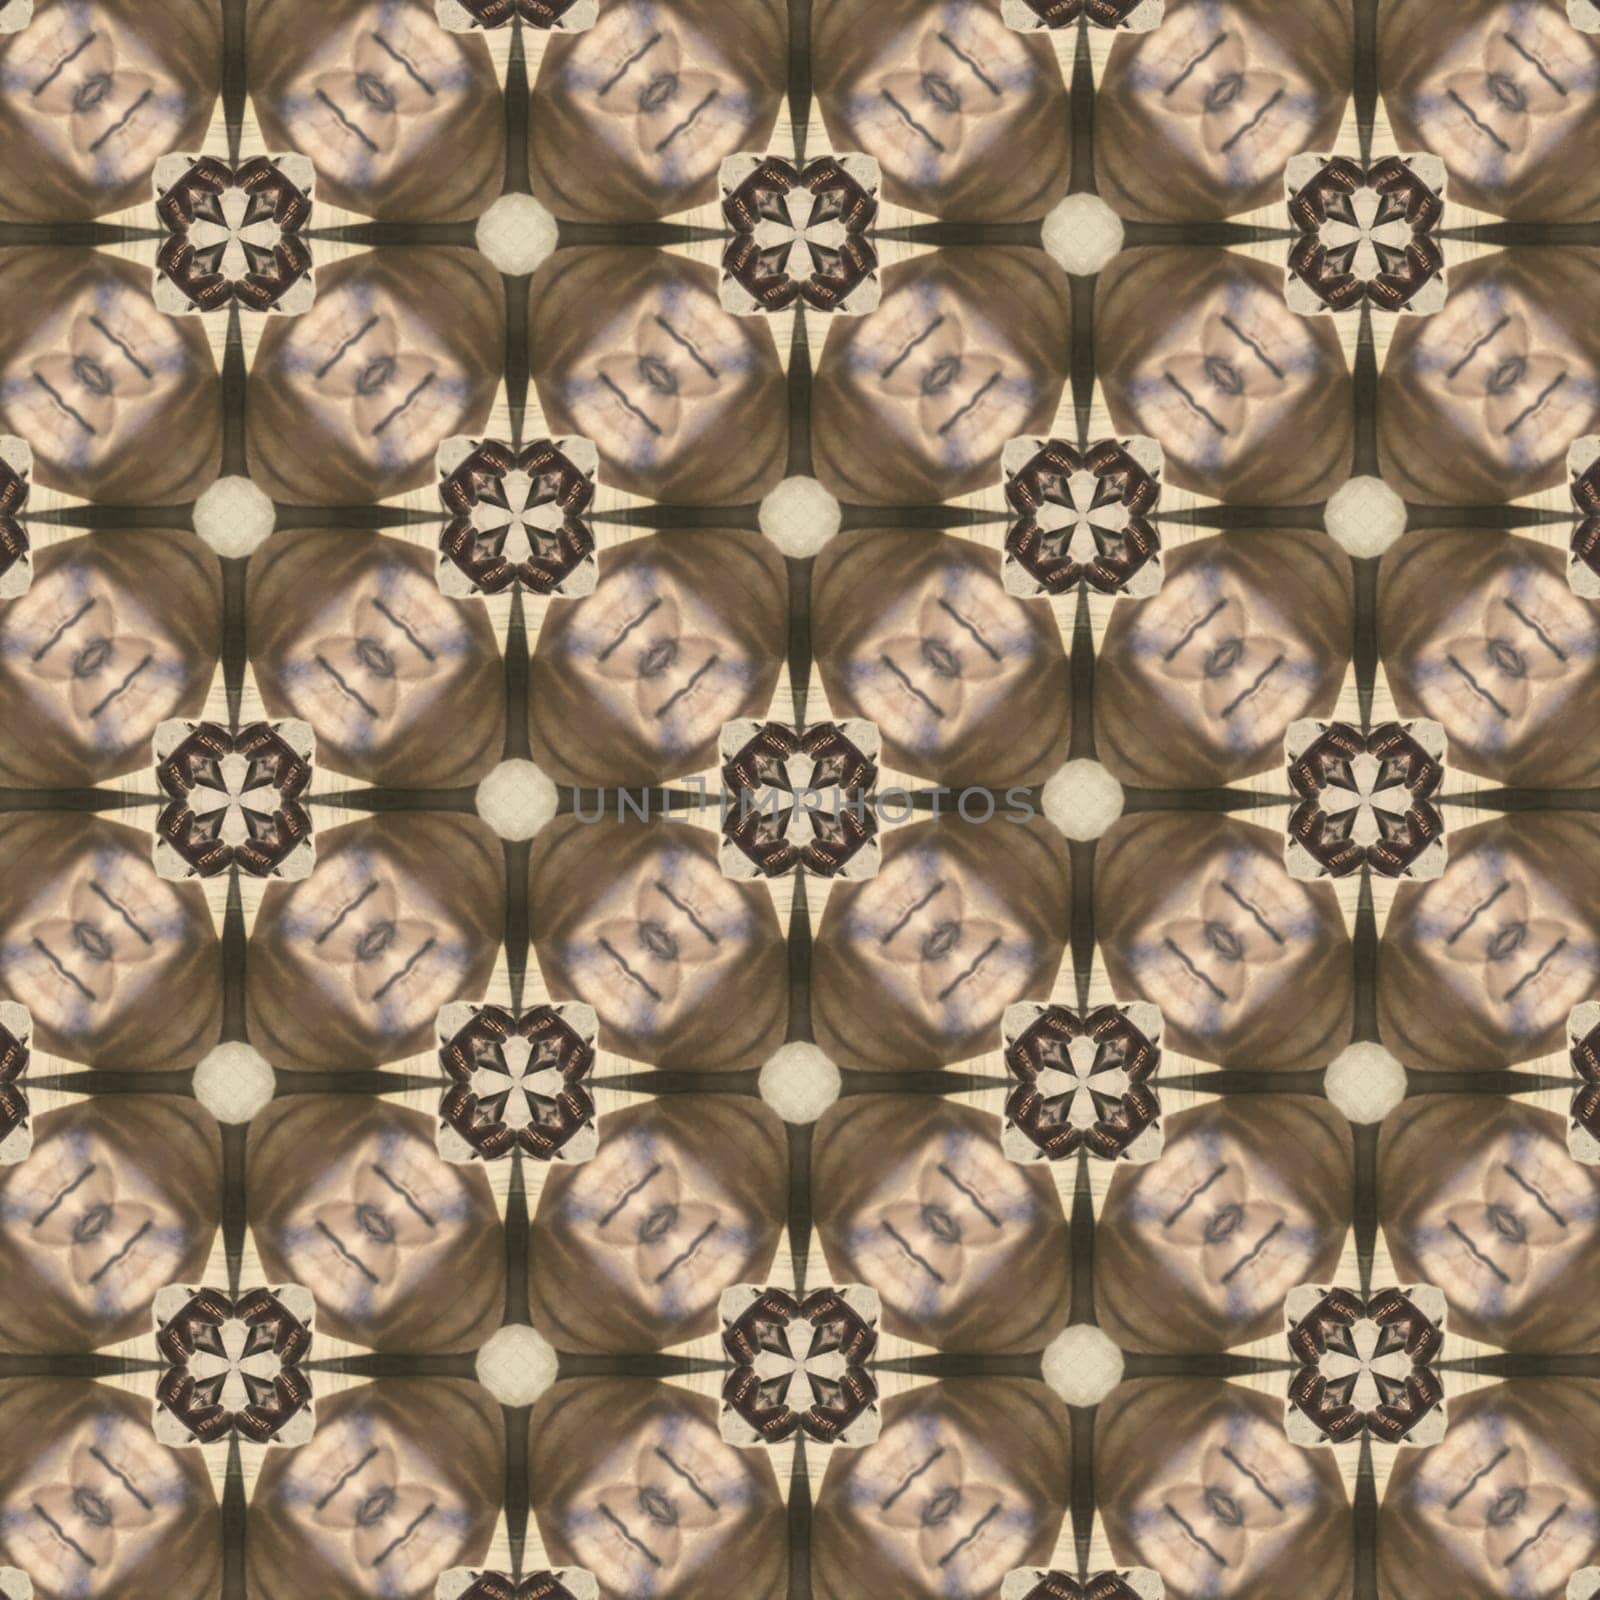 Seamless pattern of decorative ornament. For eg fabric, wallpaper, wall decorations.Kaleidoscopic wallpaper tiles. Seamless texture or background.Seamless texture of abstract geometric shapes.Patchwork texture. Weaving. Tribal motif. Textile rapport.